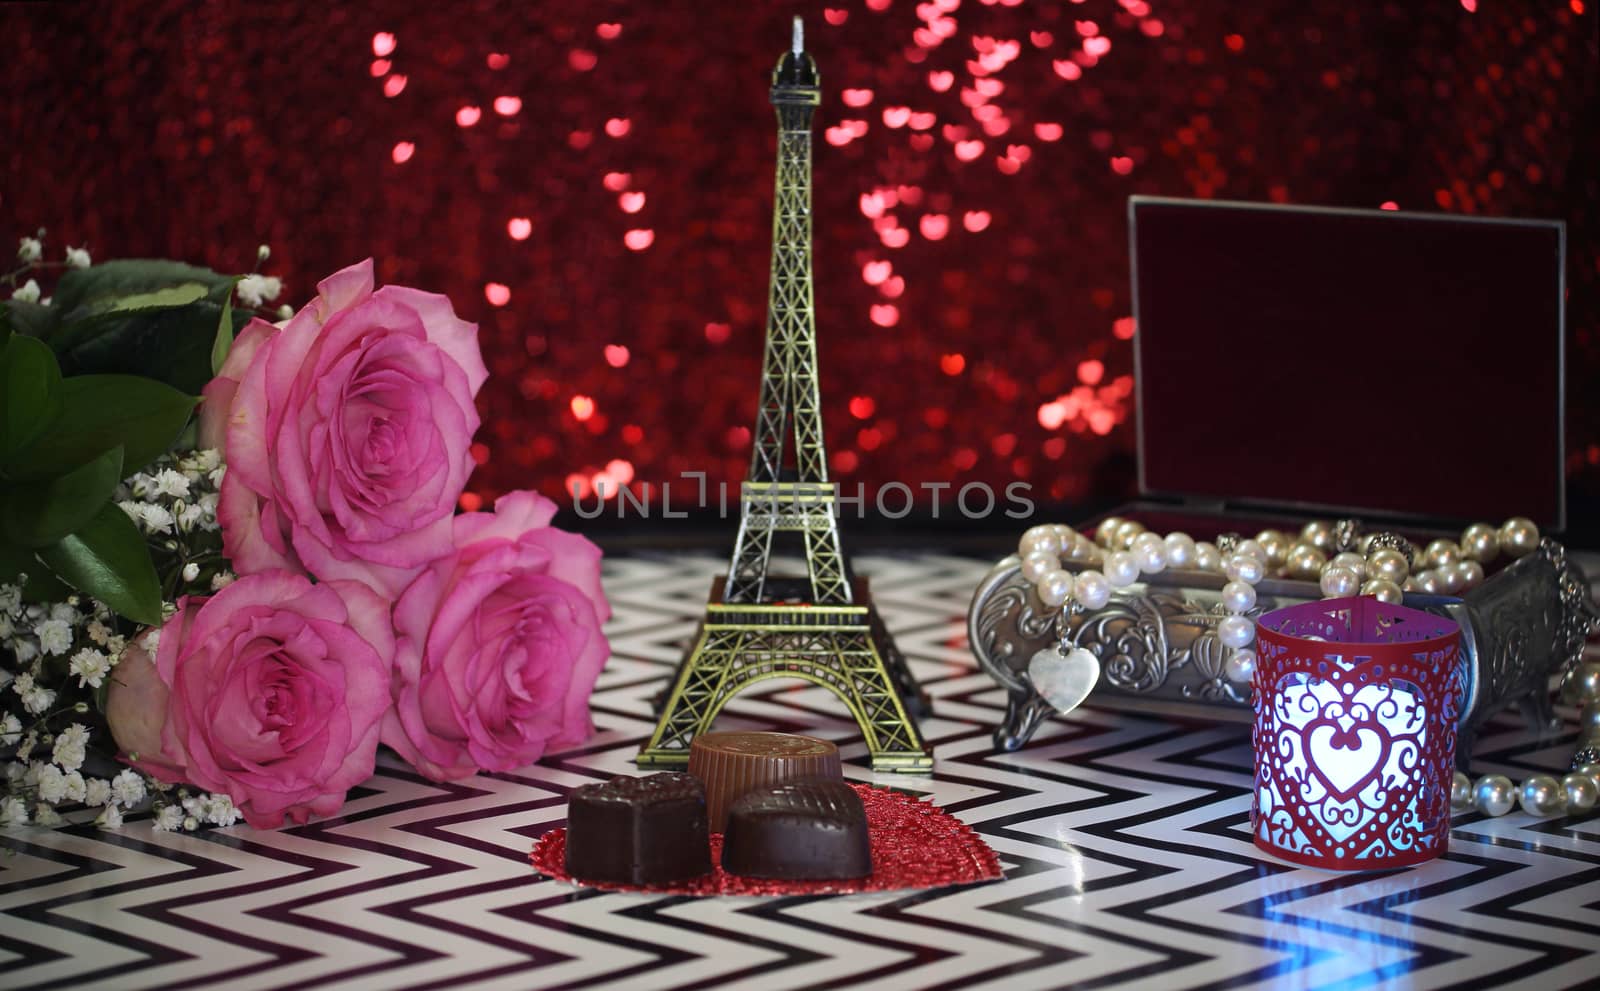 Pink Rose With Eiffel Tower by Marti157900